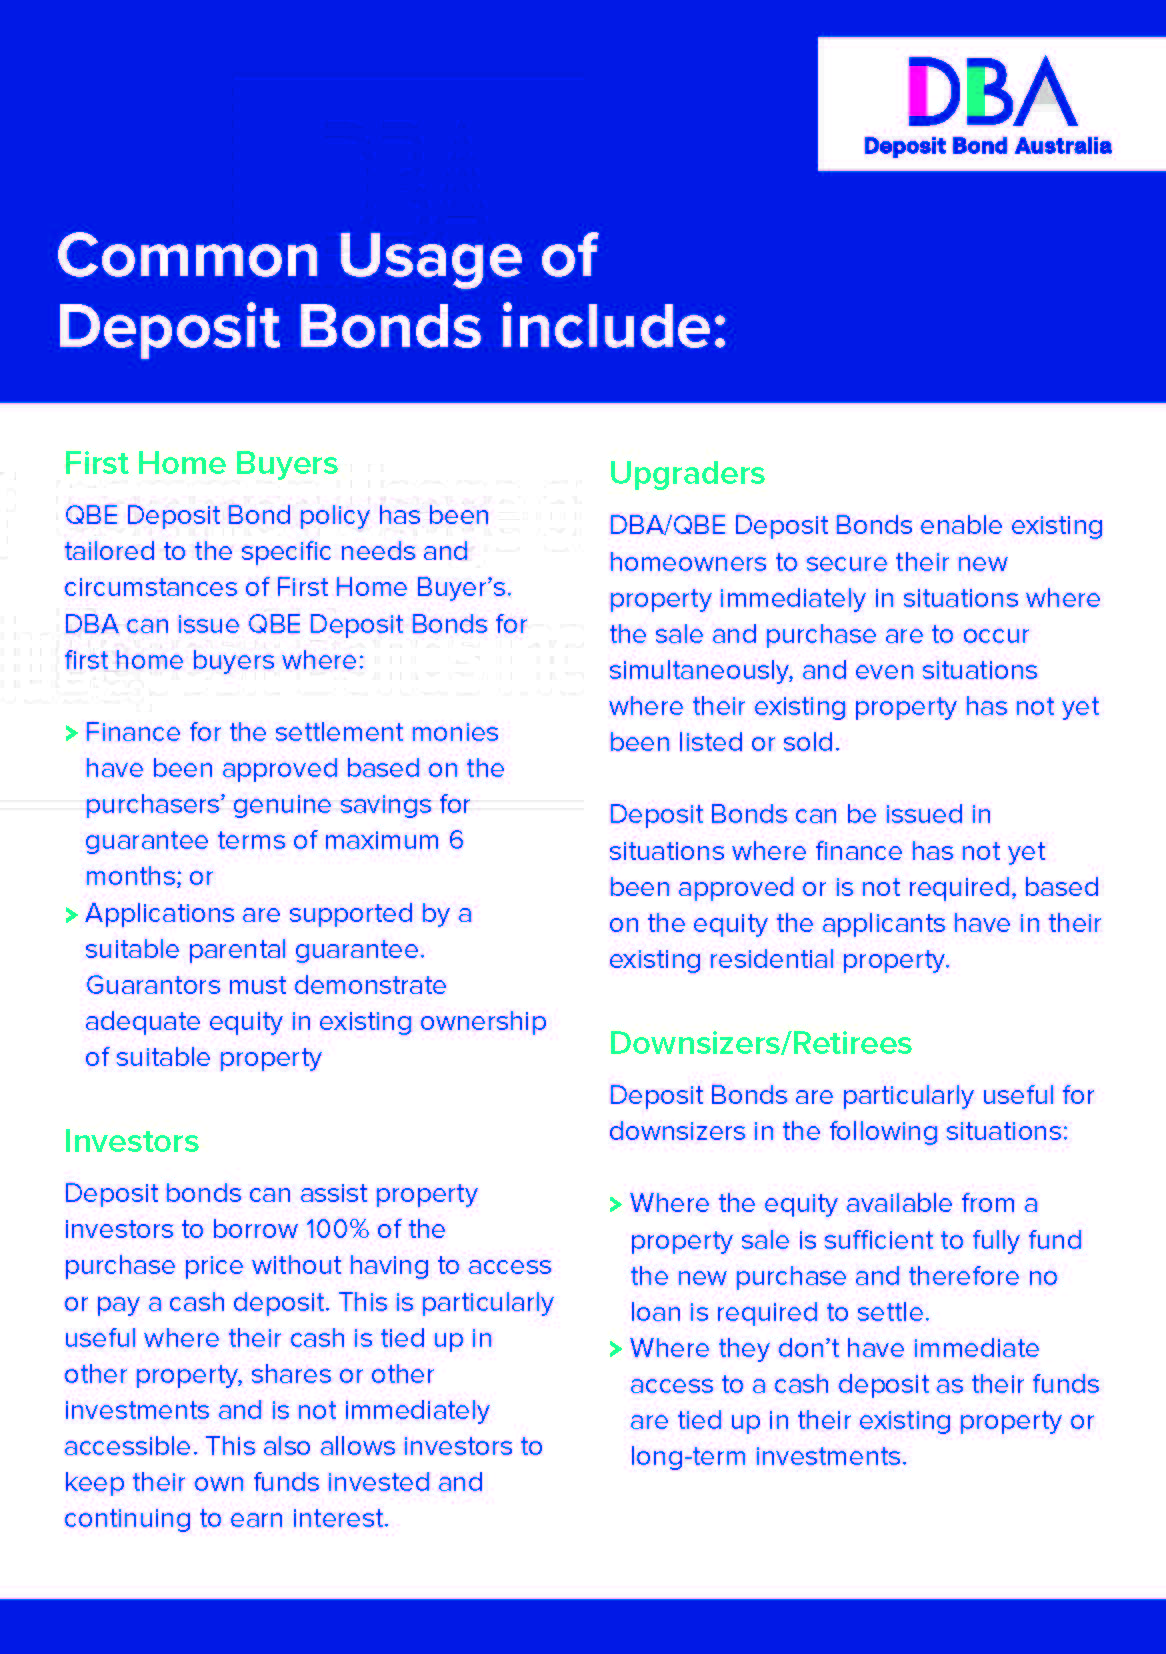 Purchasers that can use Deposit Bonds